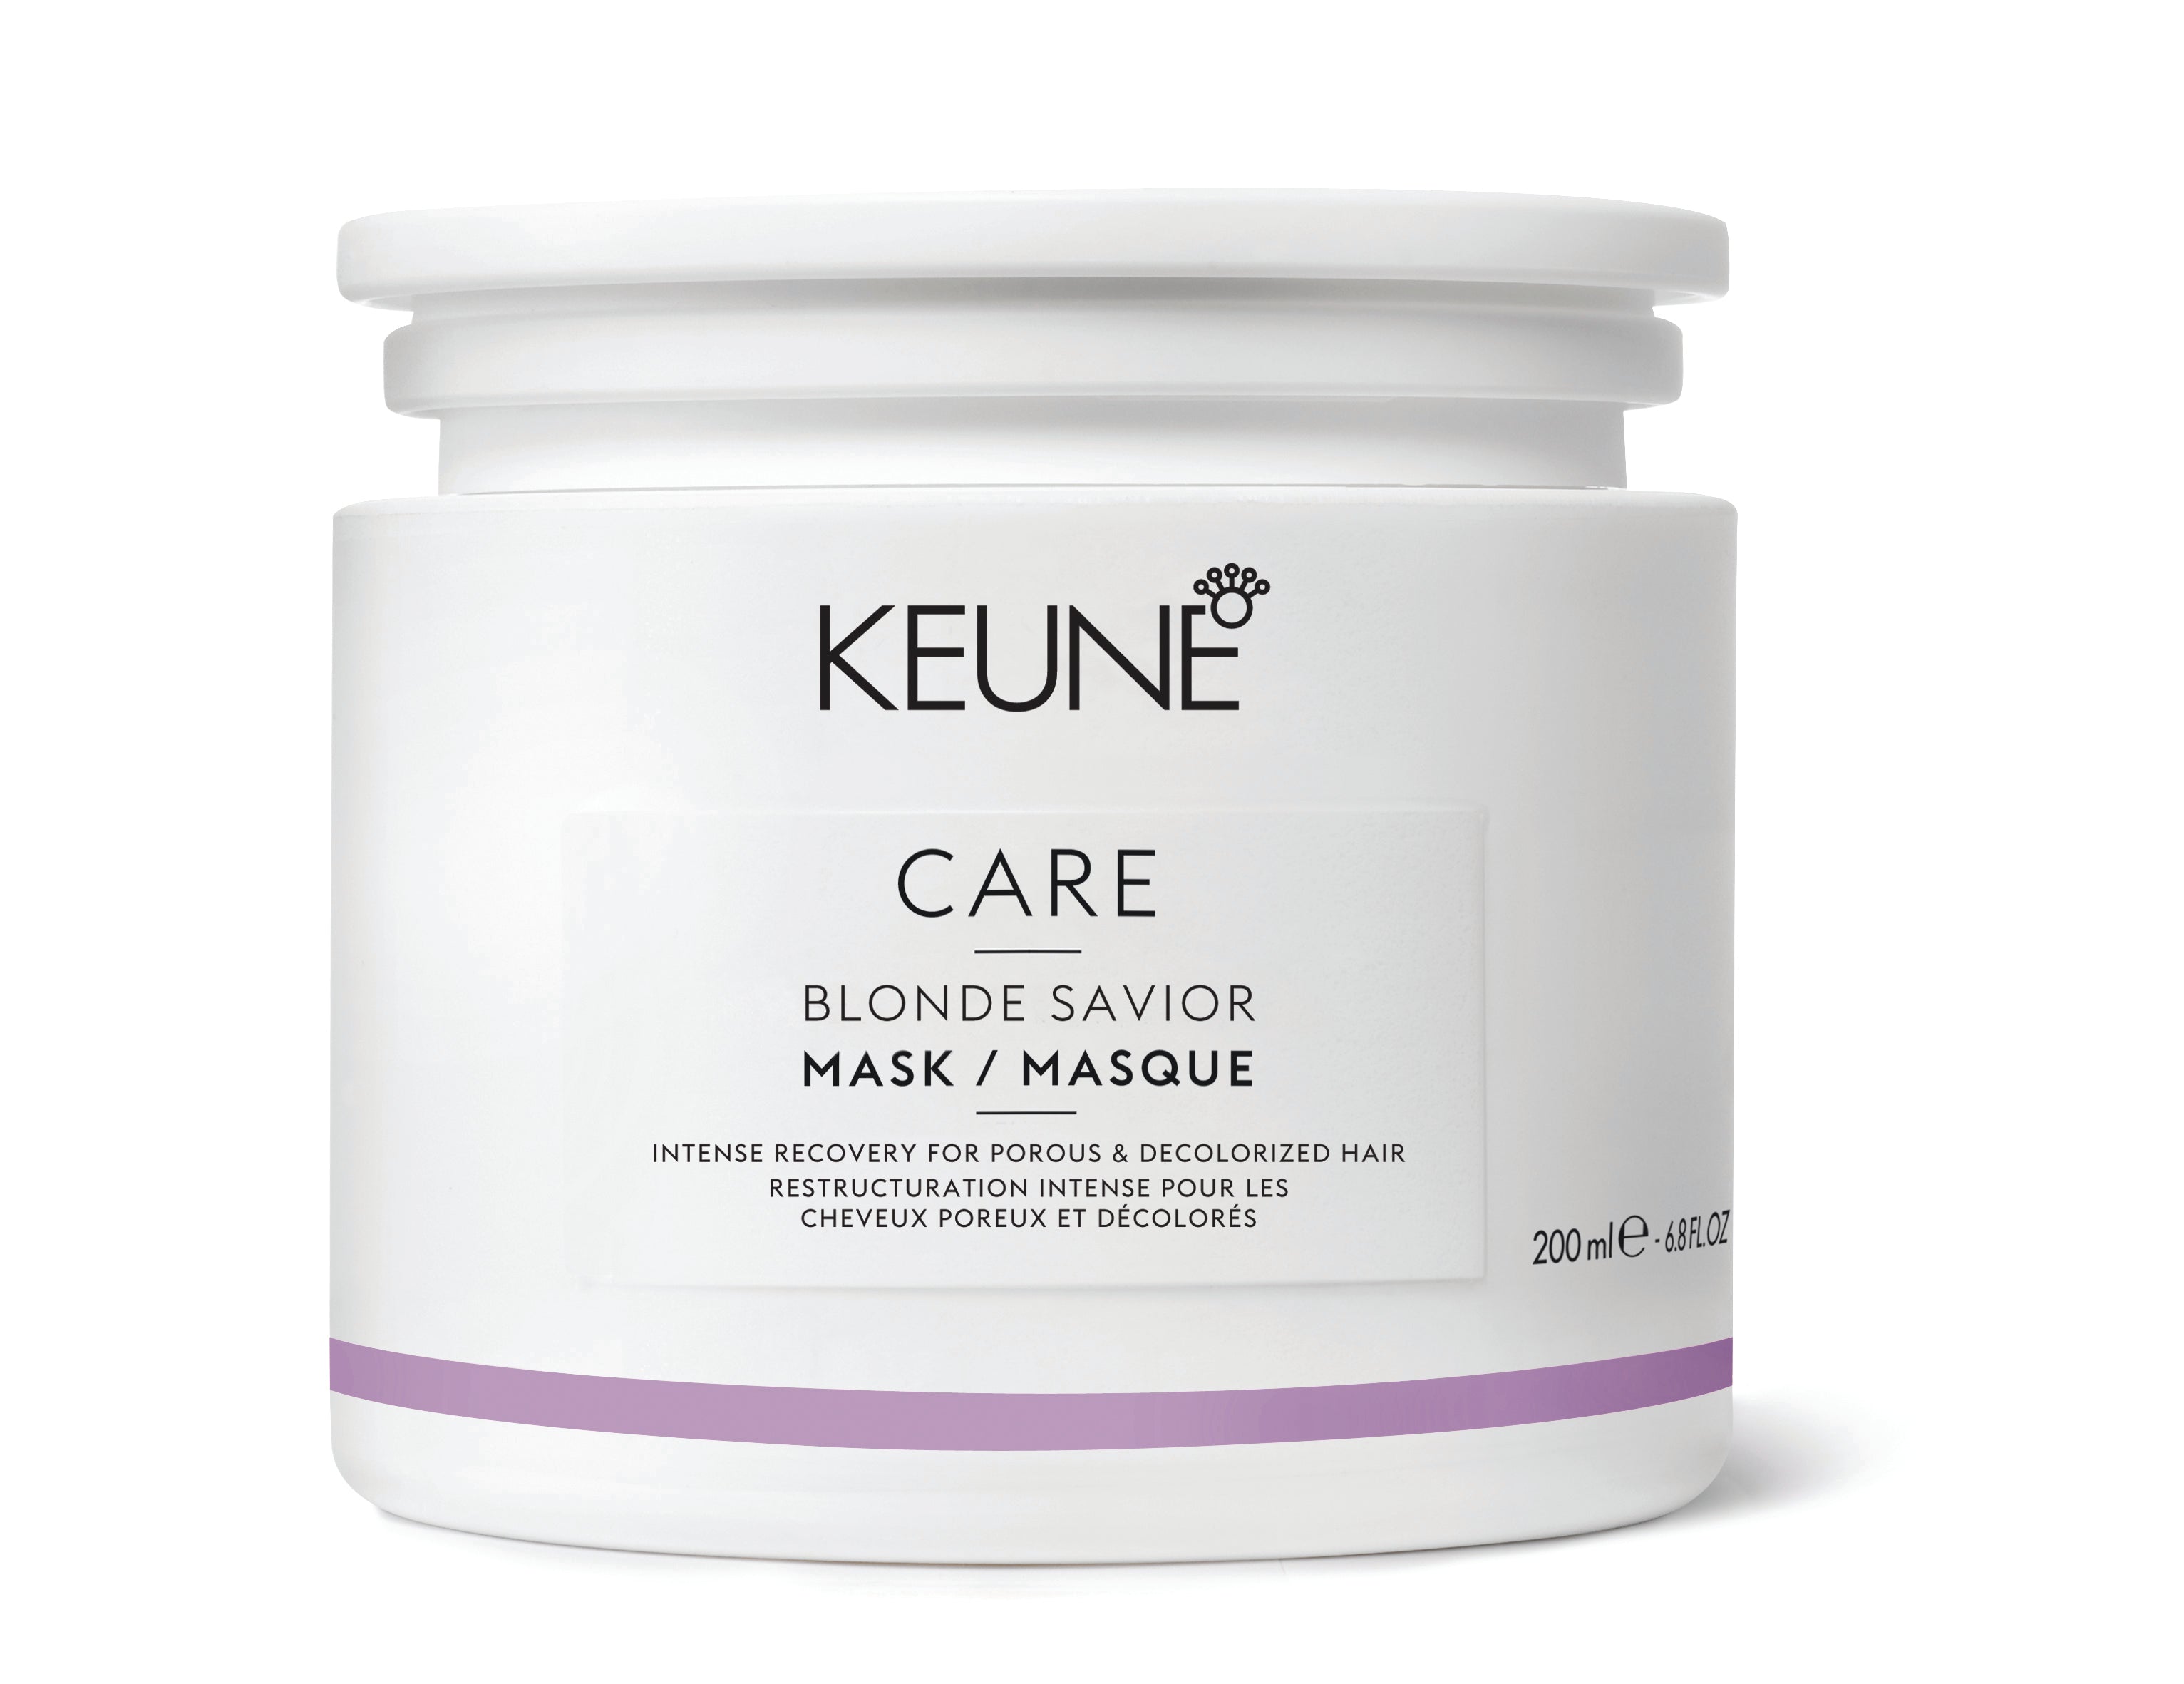 Keune Care Blonde Savior Mask 200ml * Available To Qld Customers Only!